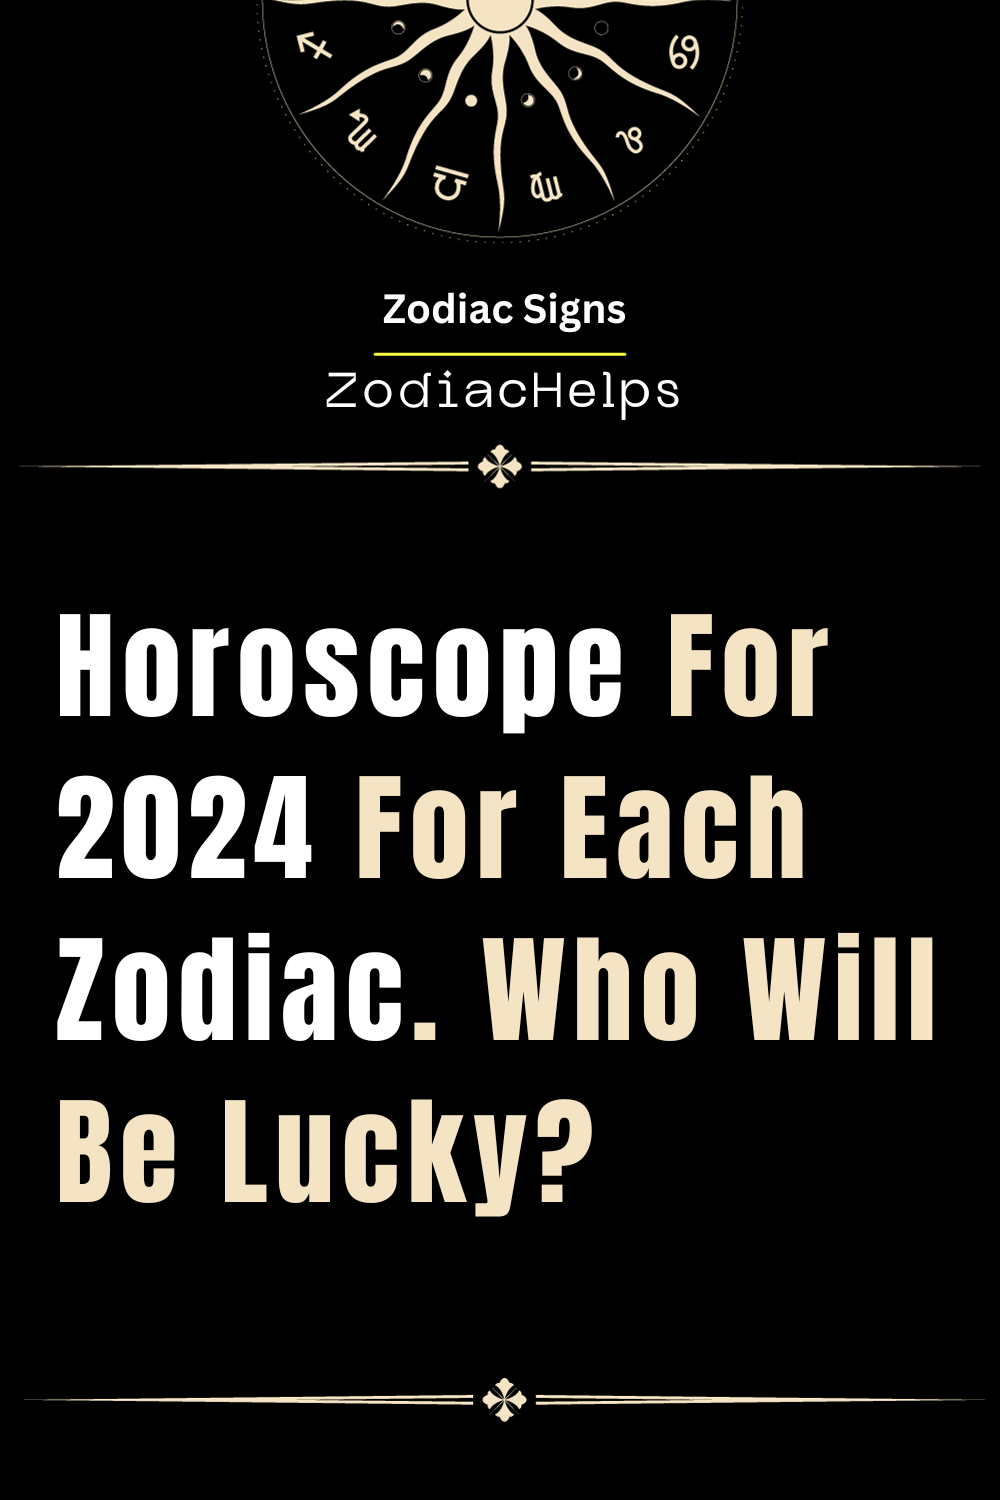 Horoscope For 2024 For Each Zodiac. Who Will Be Lucky